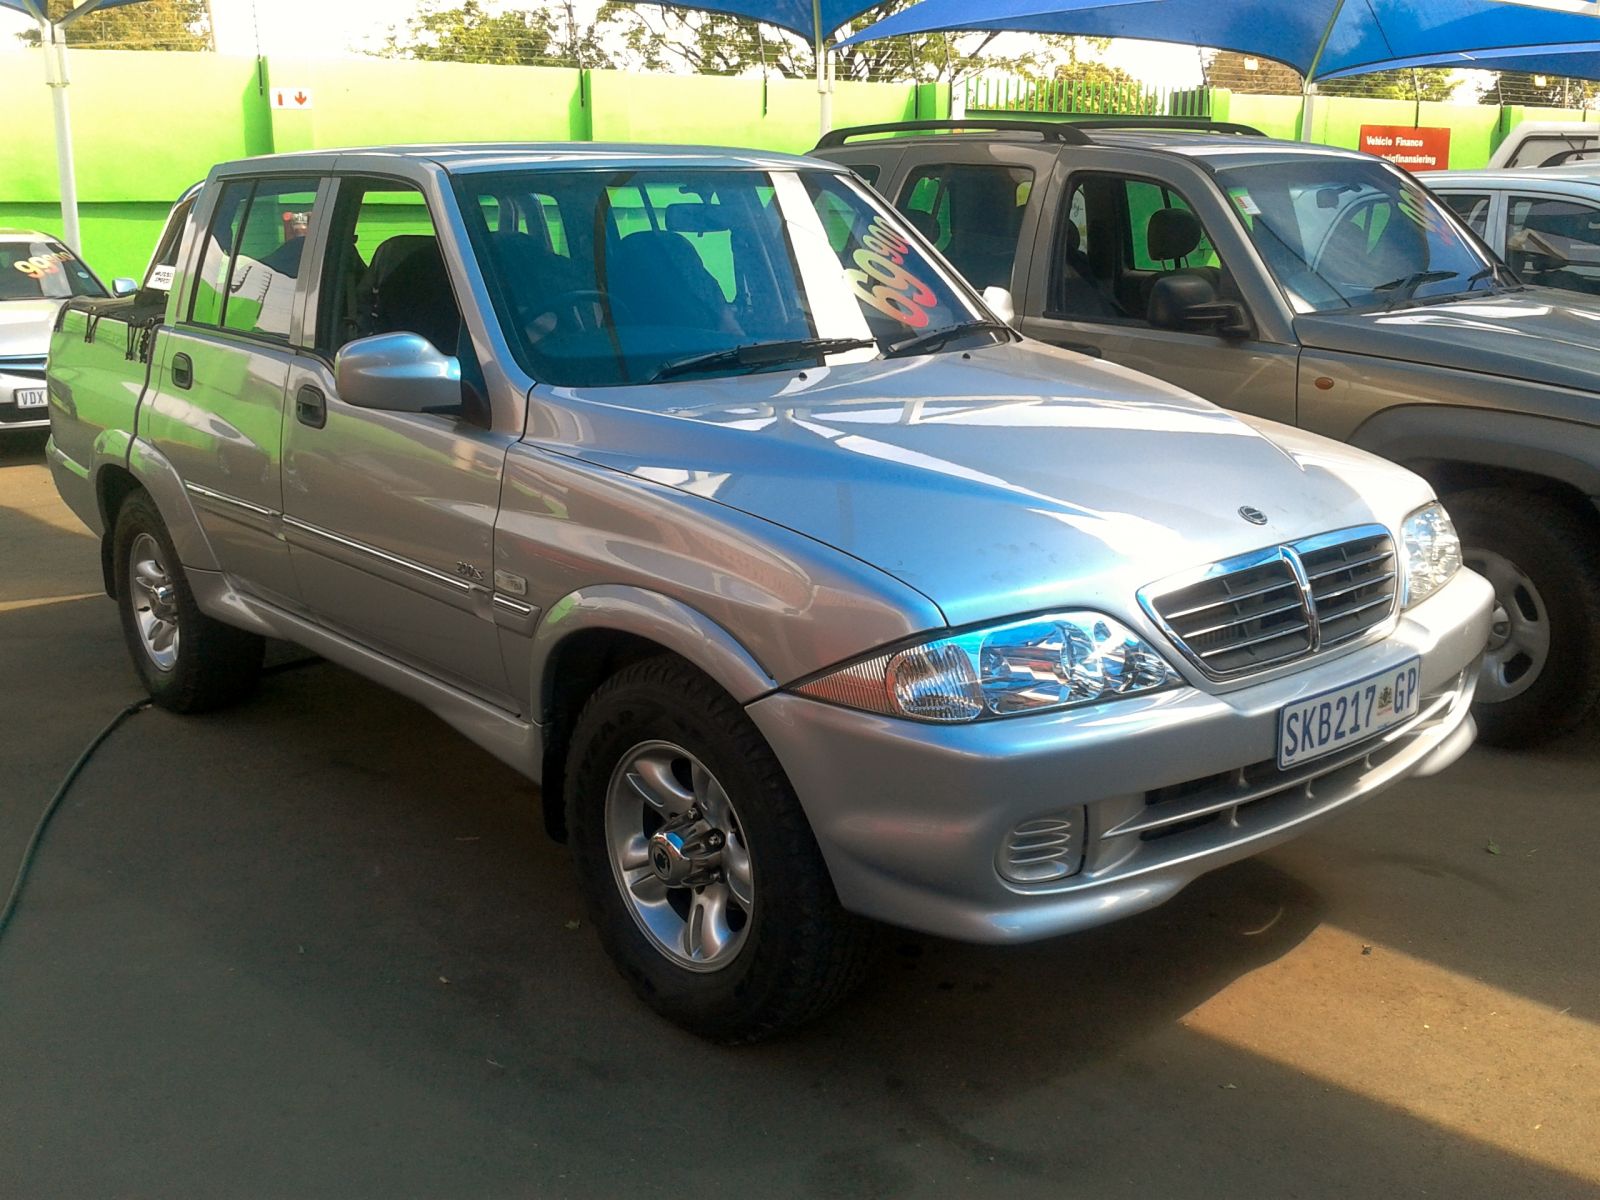 Ssangyong musso sports. SSANGYONG Musso 2005. SSANGYONG Musso 4x4. Санг енг Муссо спорт. SSANGYONG Musso Sports, 2005.